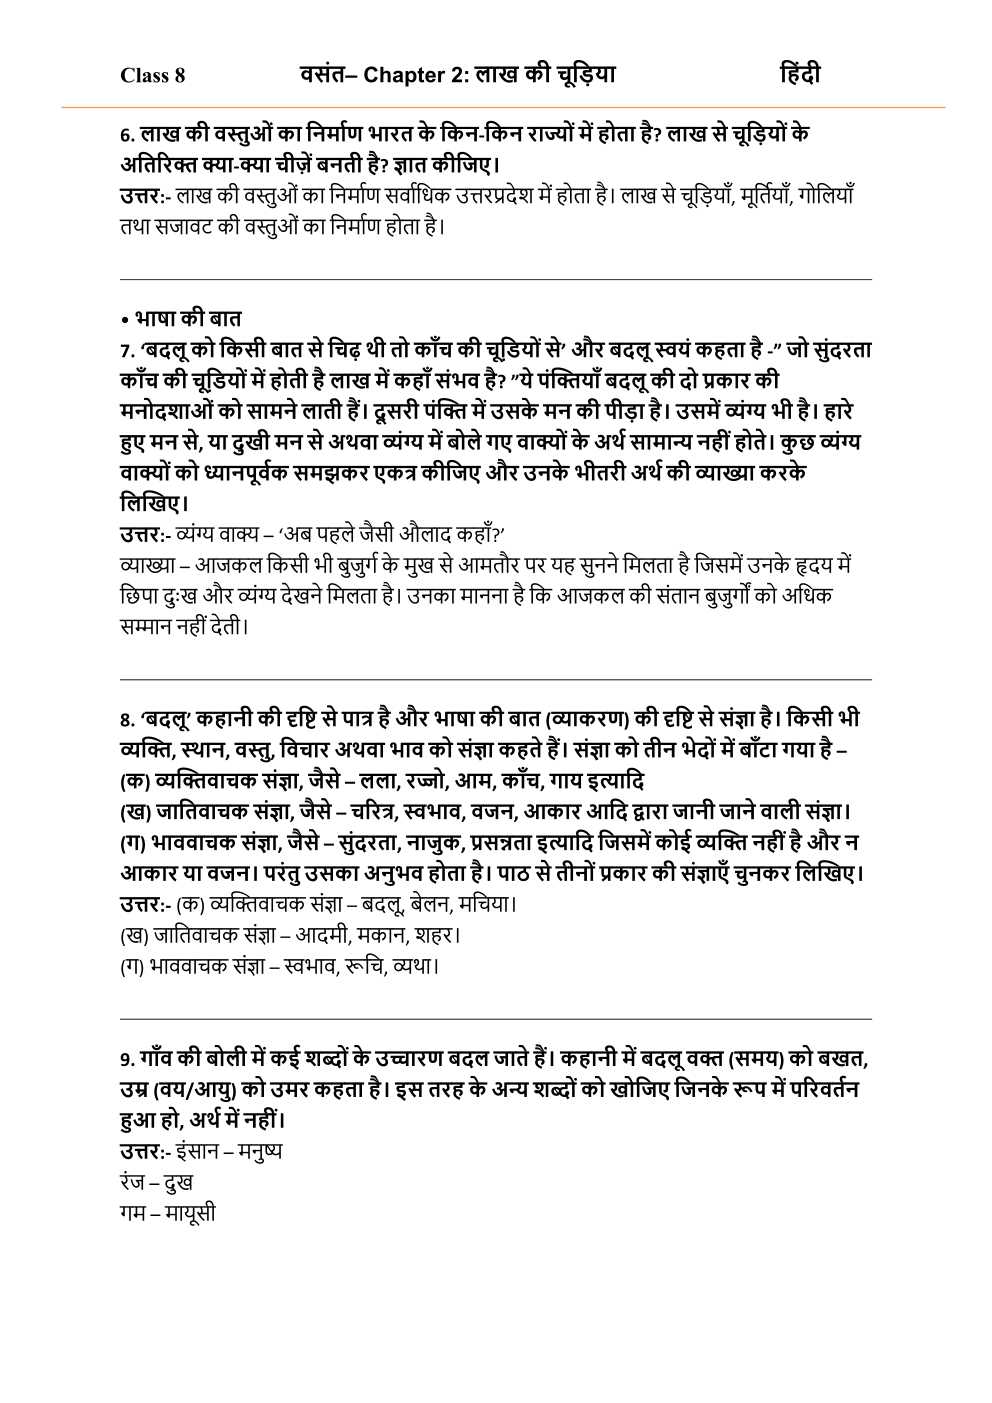 NCERT Solutions For Class 8 Hindi Vasant Chapter 2